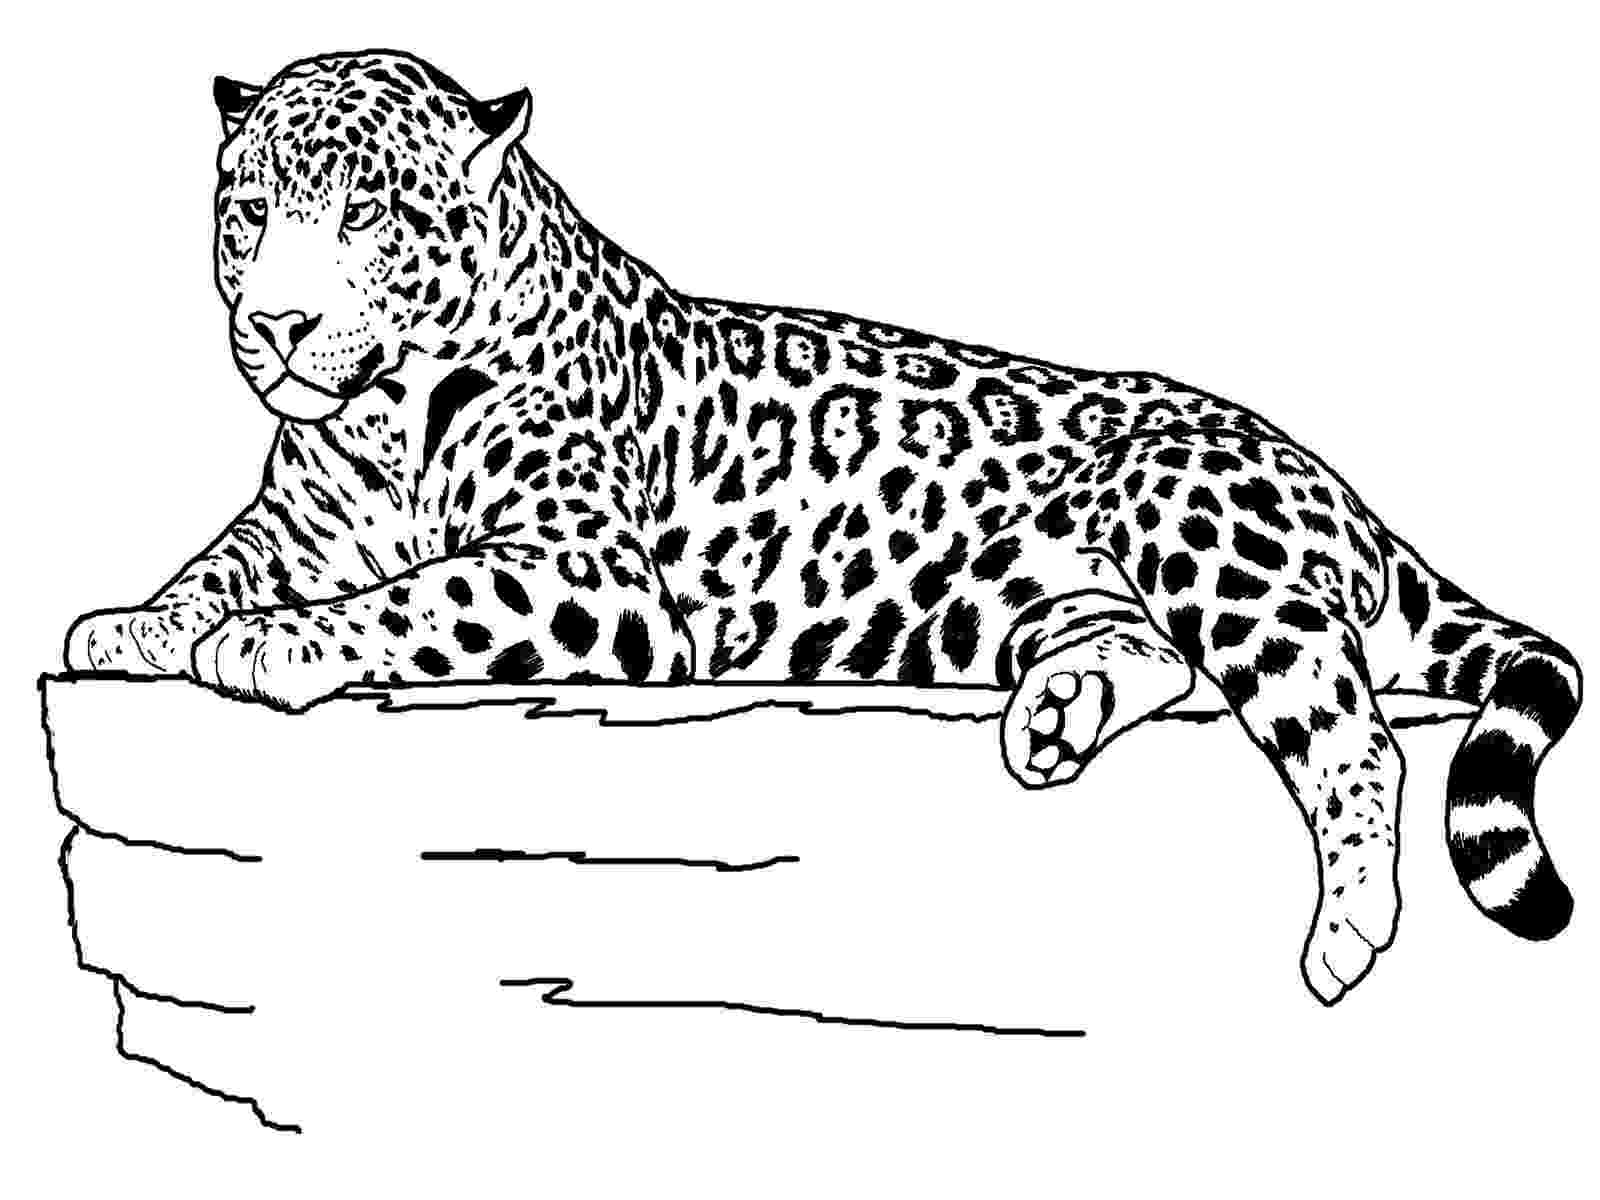 leopard pictures to color leopard coloring pages to download and print for free pictures color leopard to 